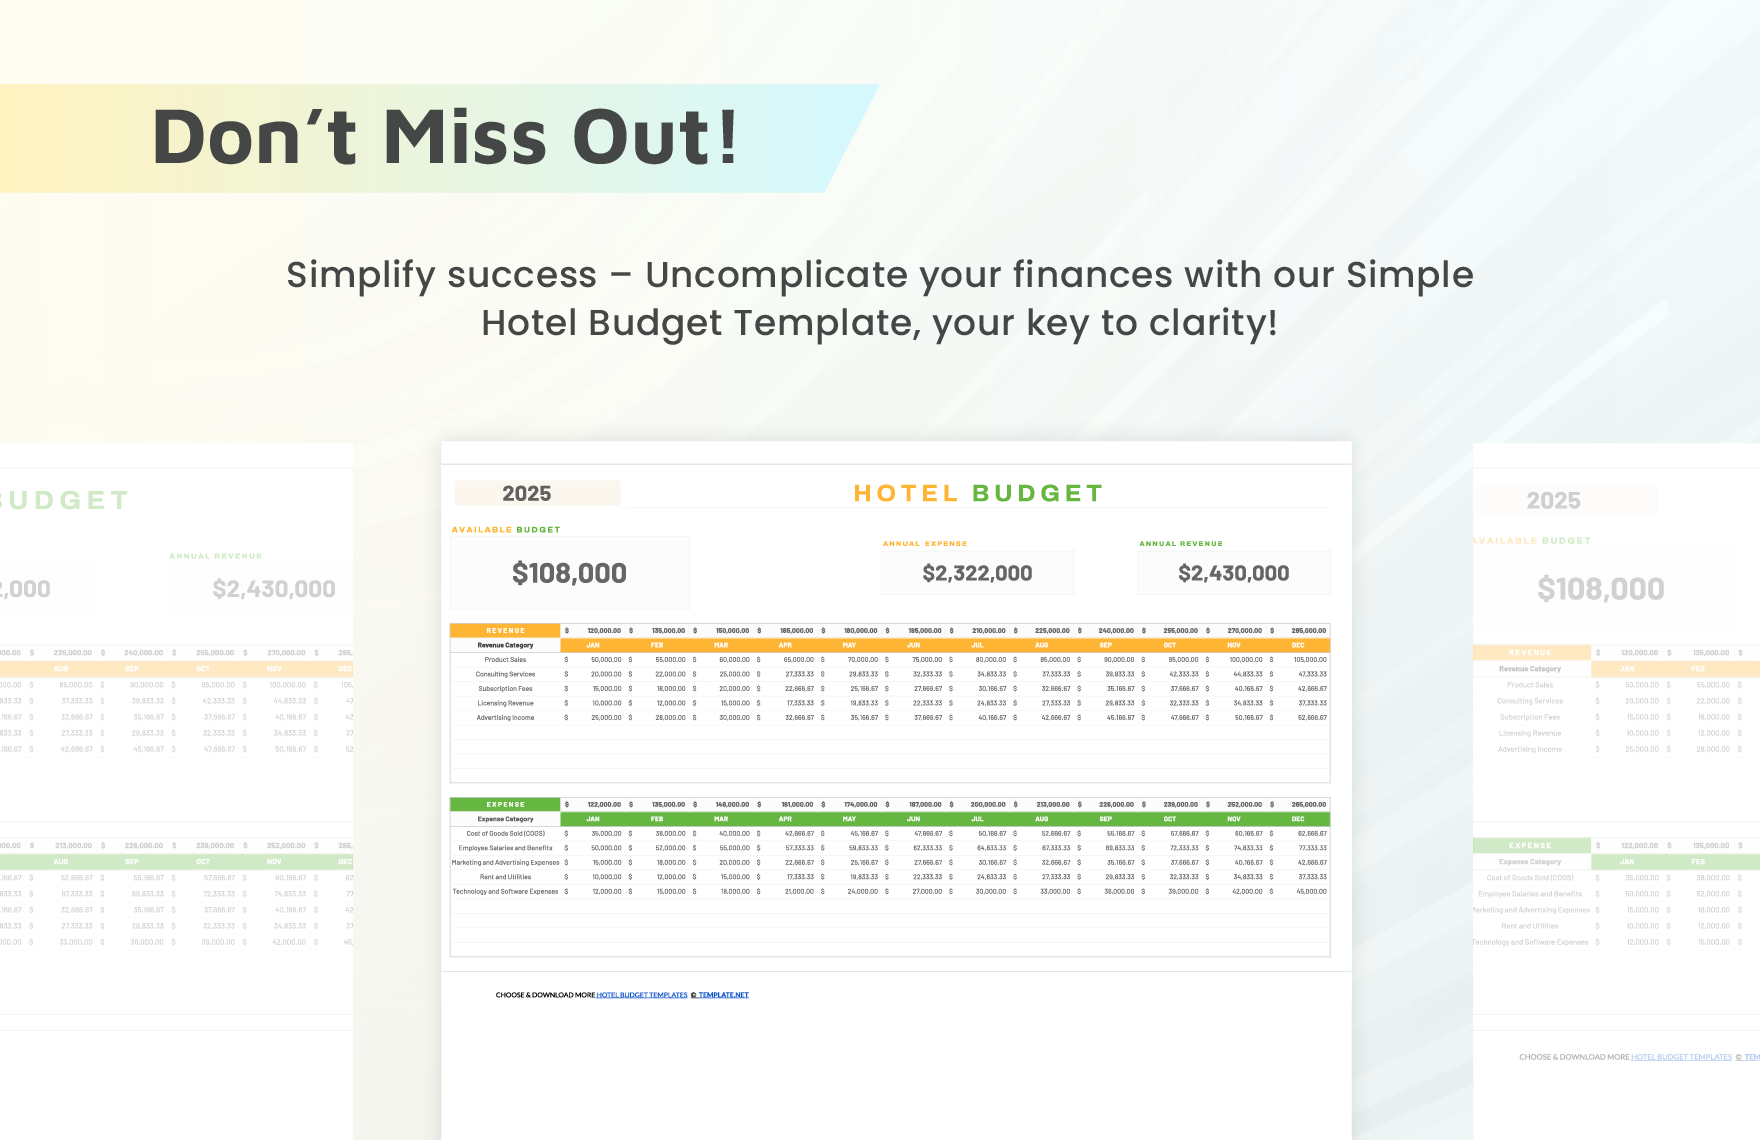 Simple Hotel Budget Template